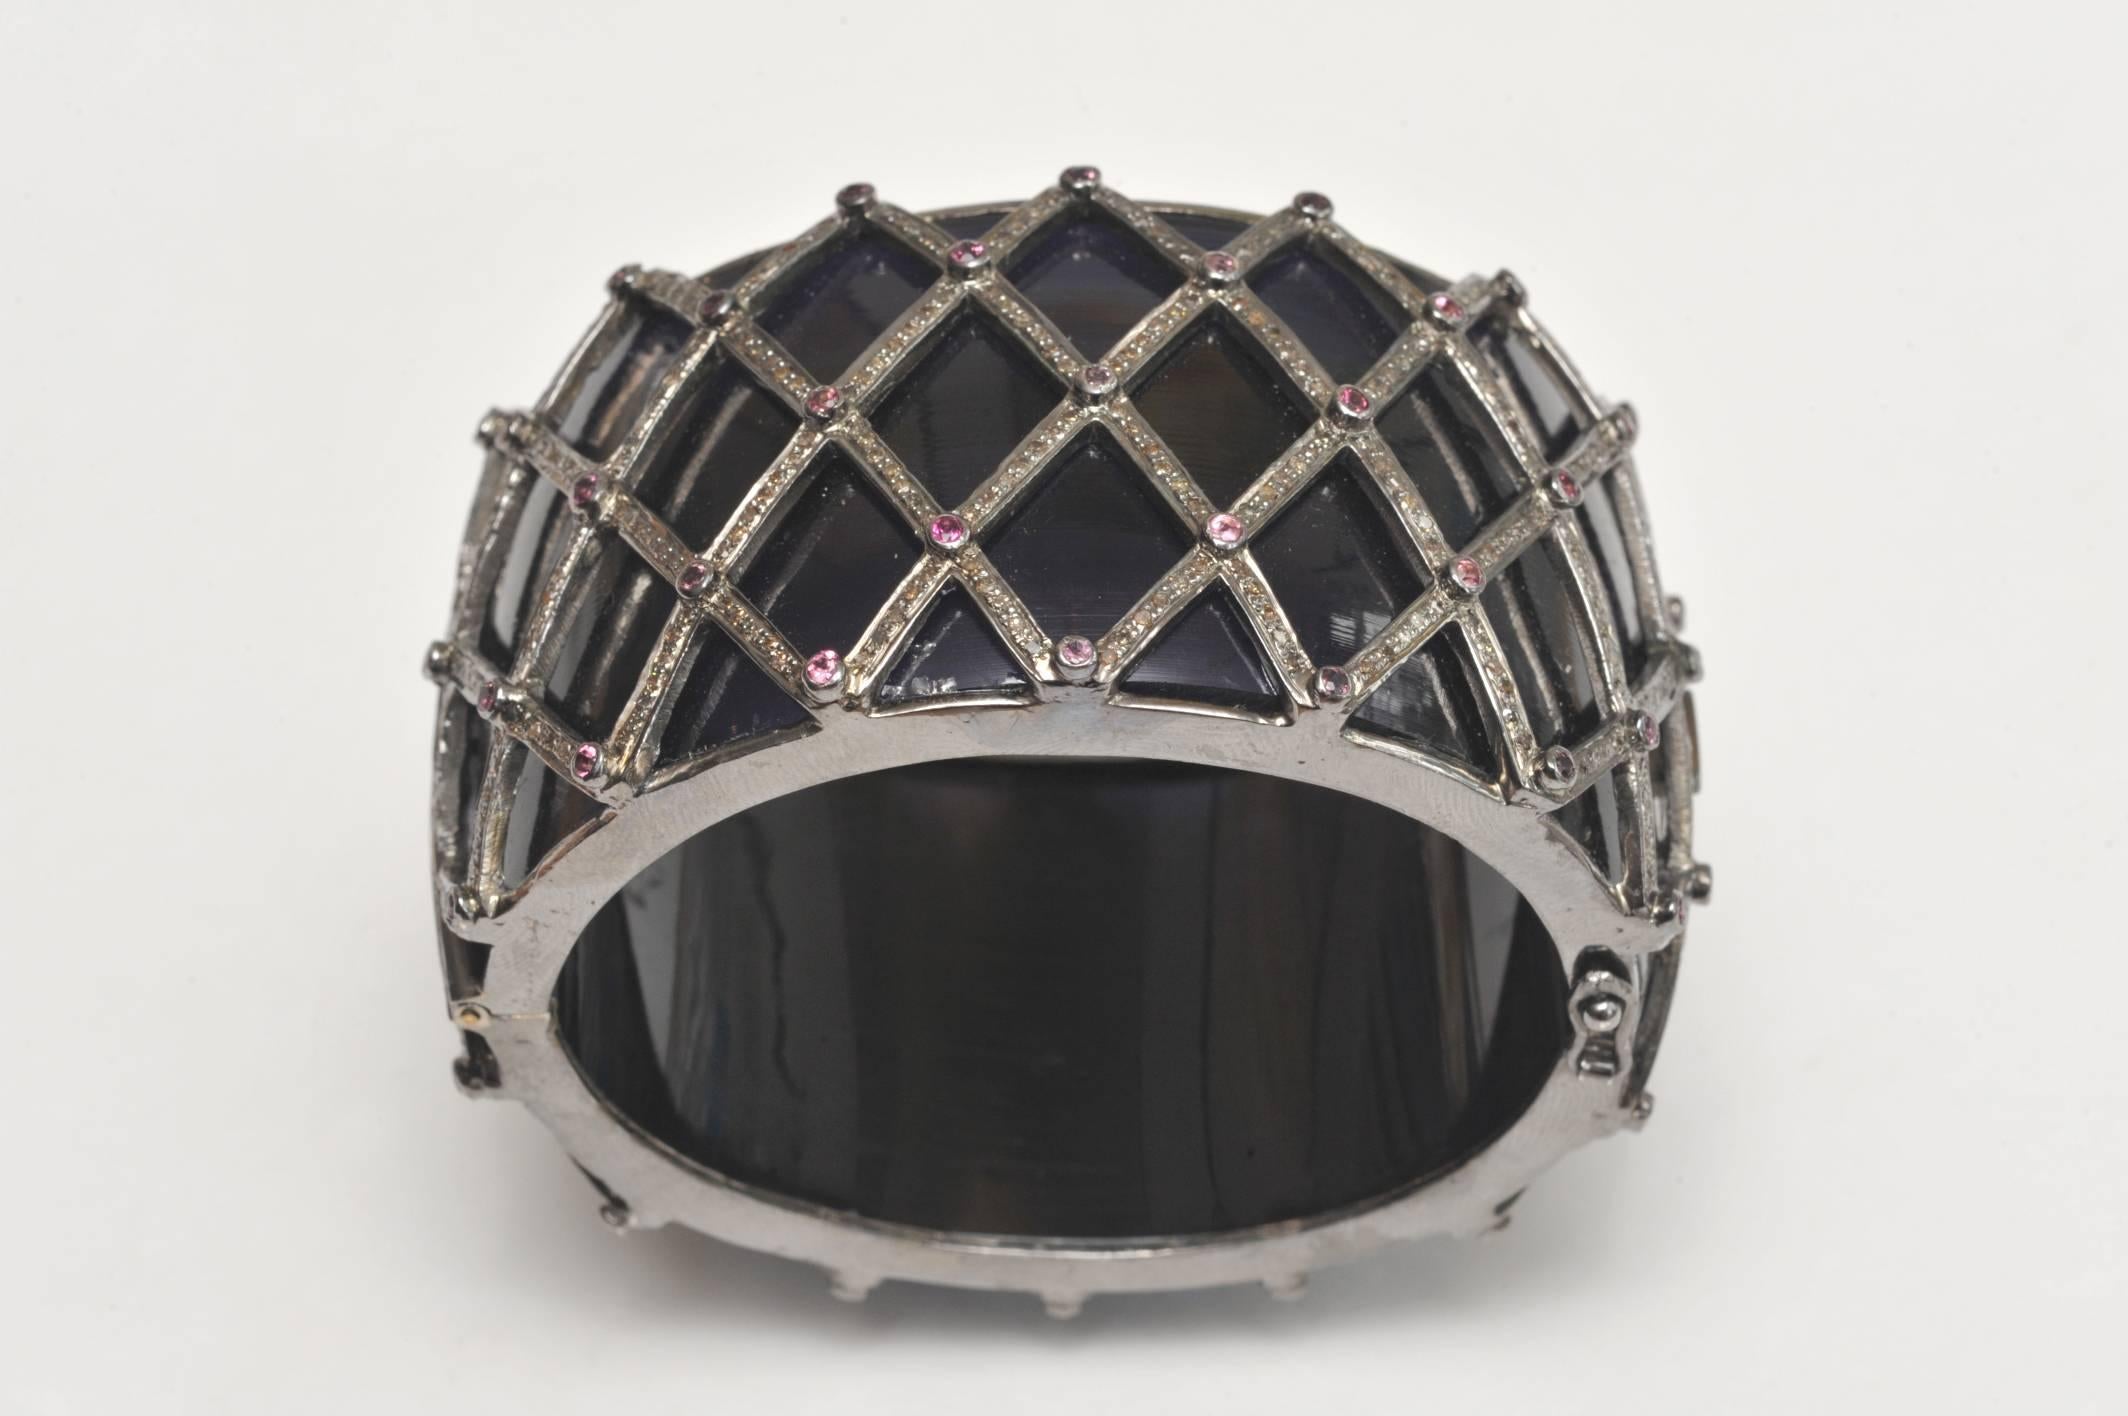 Unusual black enamel, hinged cuff bracelet in sterling silver with faceted rubies and pave` set diamonds.   4.94 ct of diamonds, 2.40 ct of rubies.  Cross hatch design covers entire bracelet, push clasp with safety catches.  Interior circumference